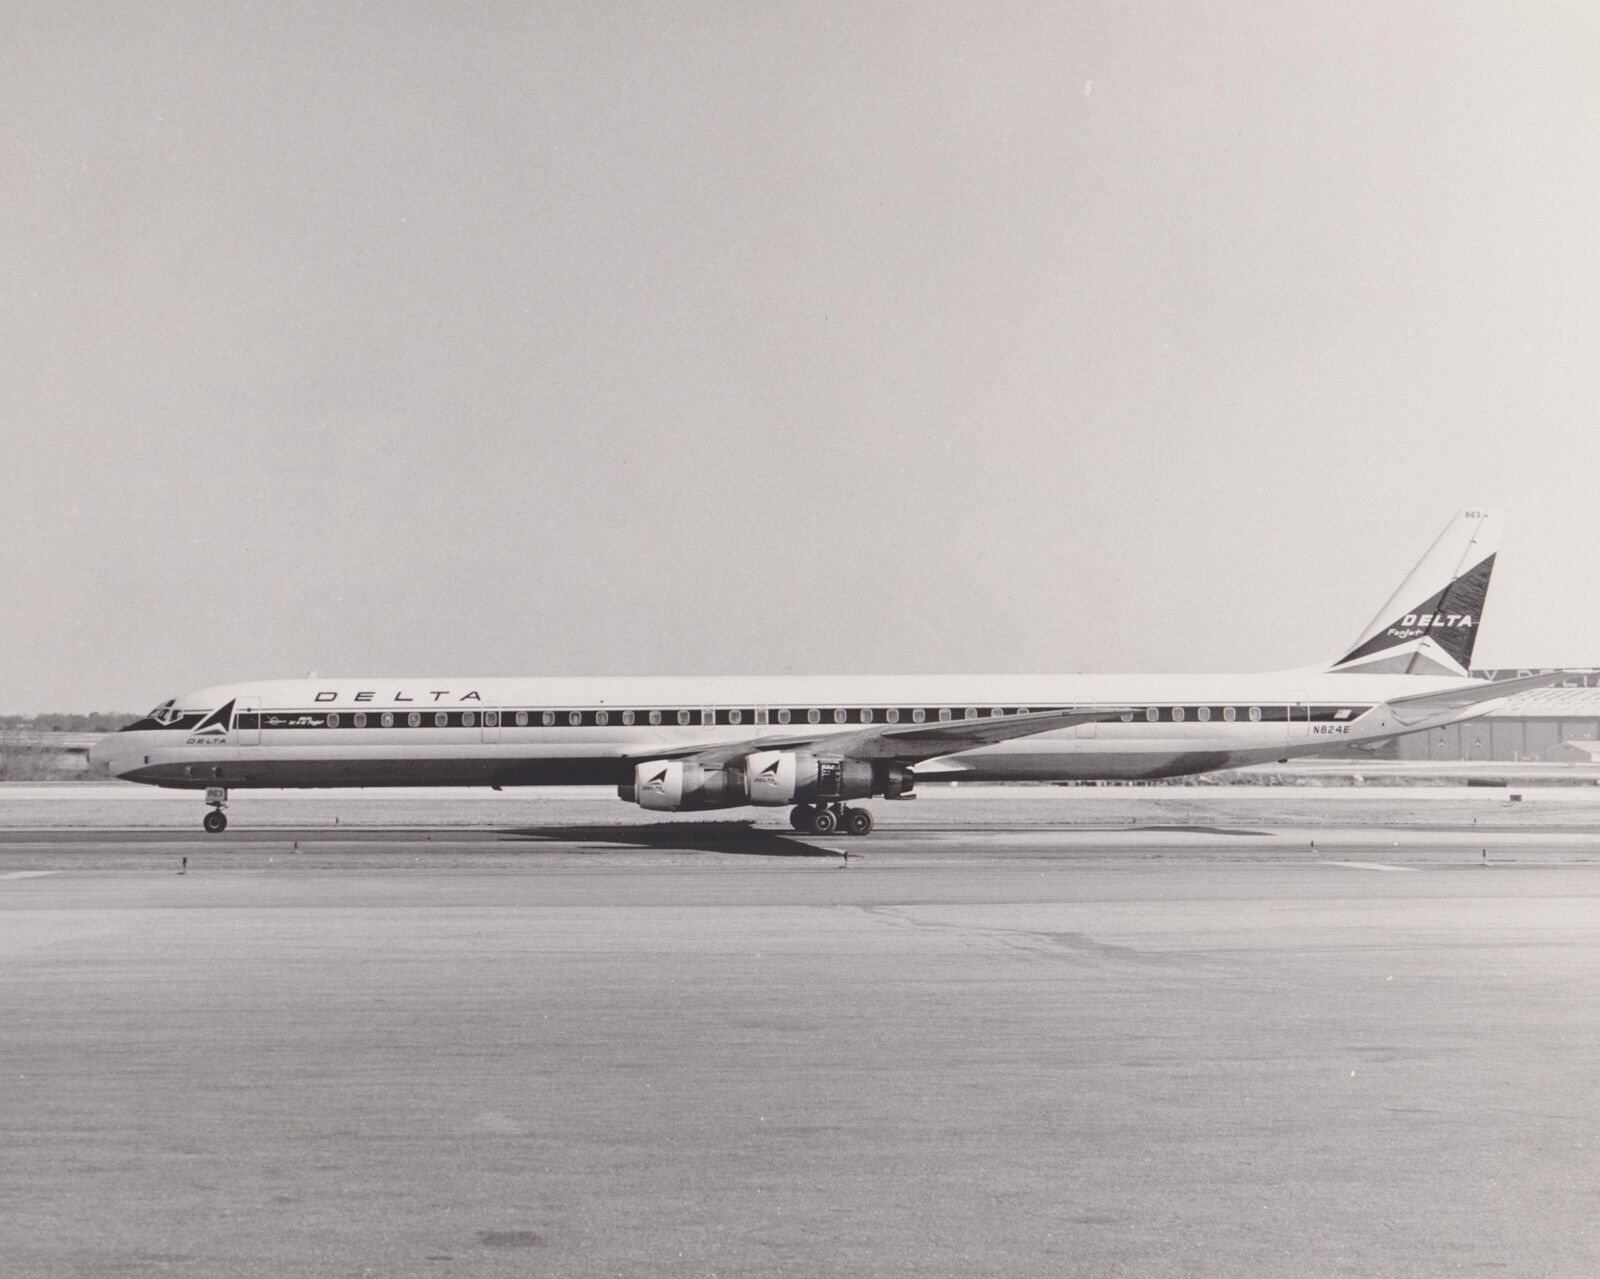 DELTA AIR LINES - SUPER DC 8 71 (STRETCH) TAXING  LH - BLACK & WHITE 8 X 10  